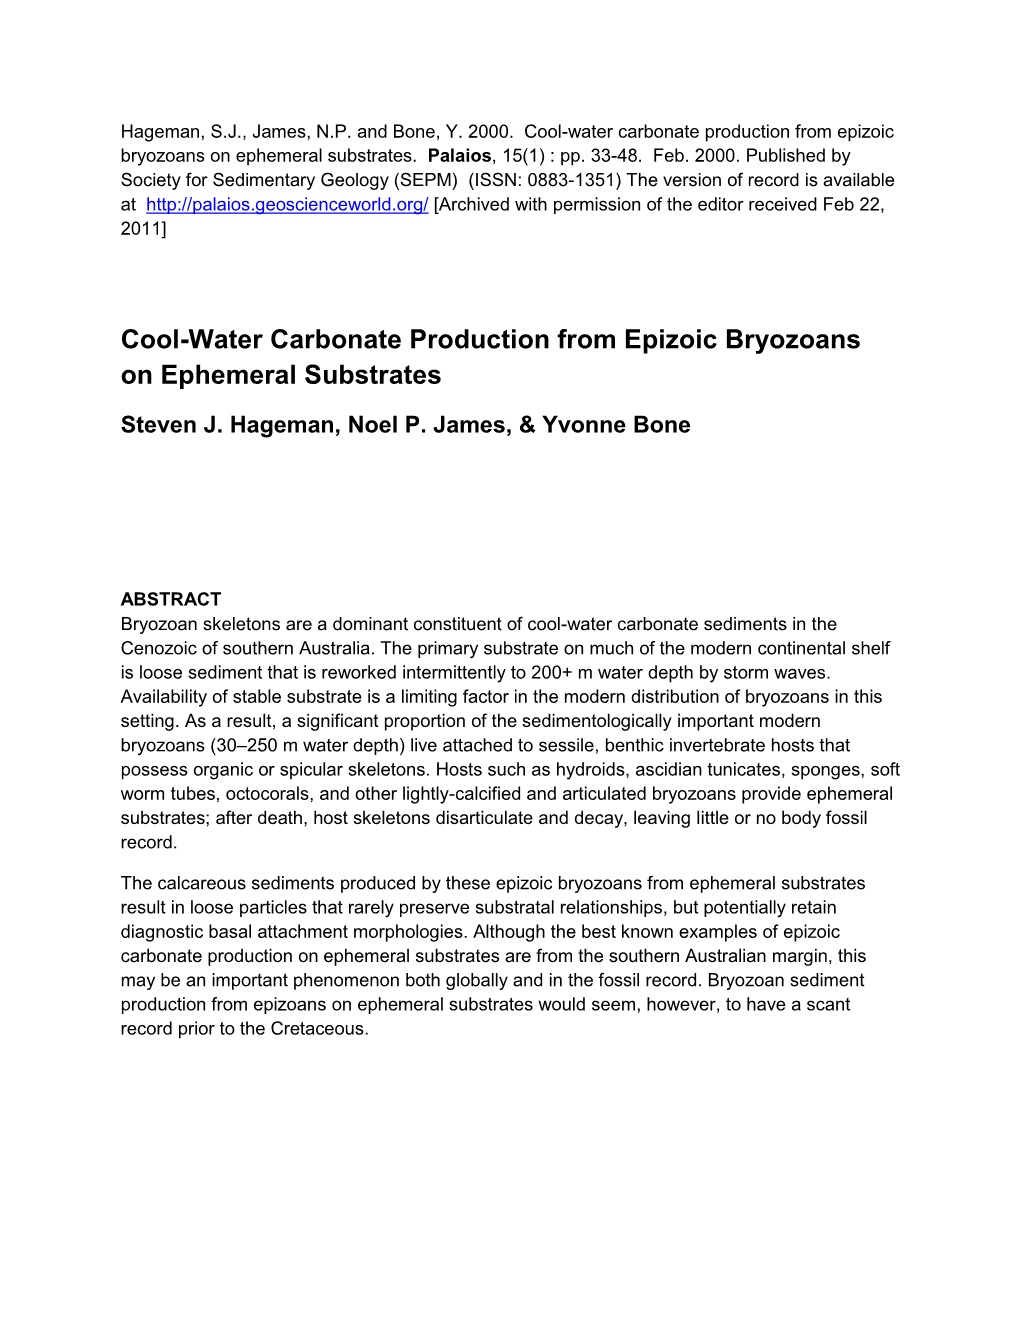 Cool-Water Carbonate Production from Epizoic Bryozoans on Ephemeral Substrates